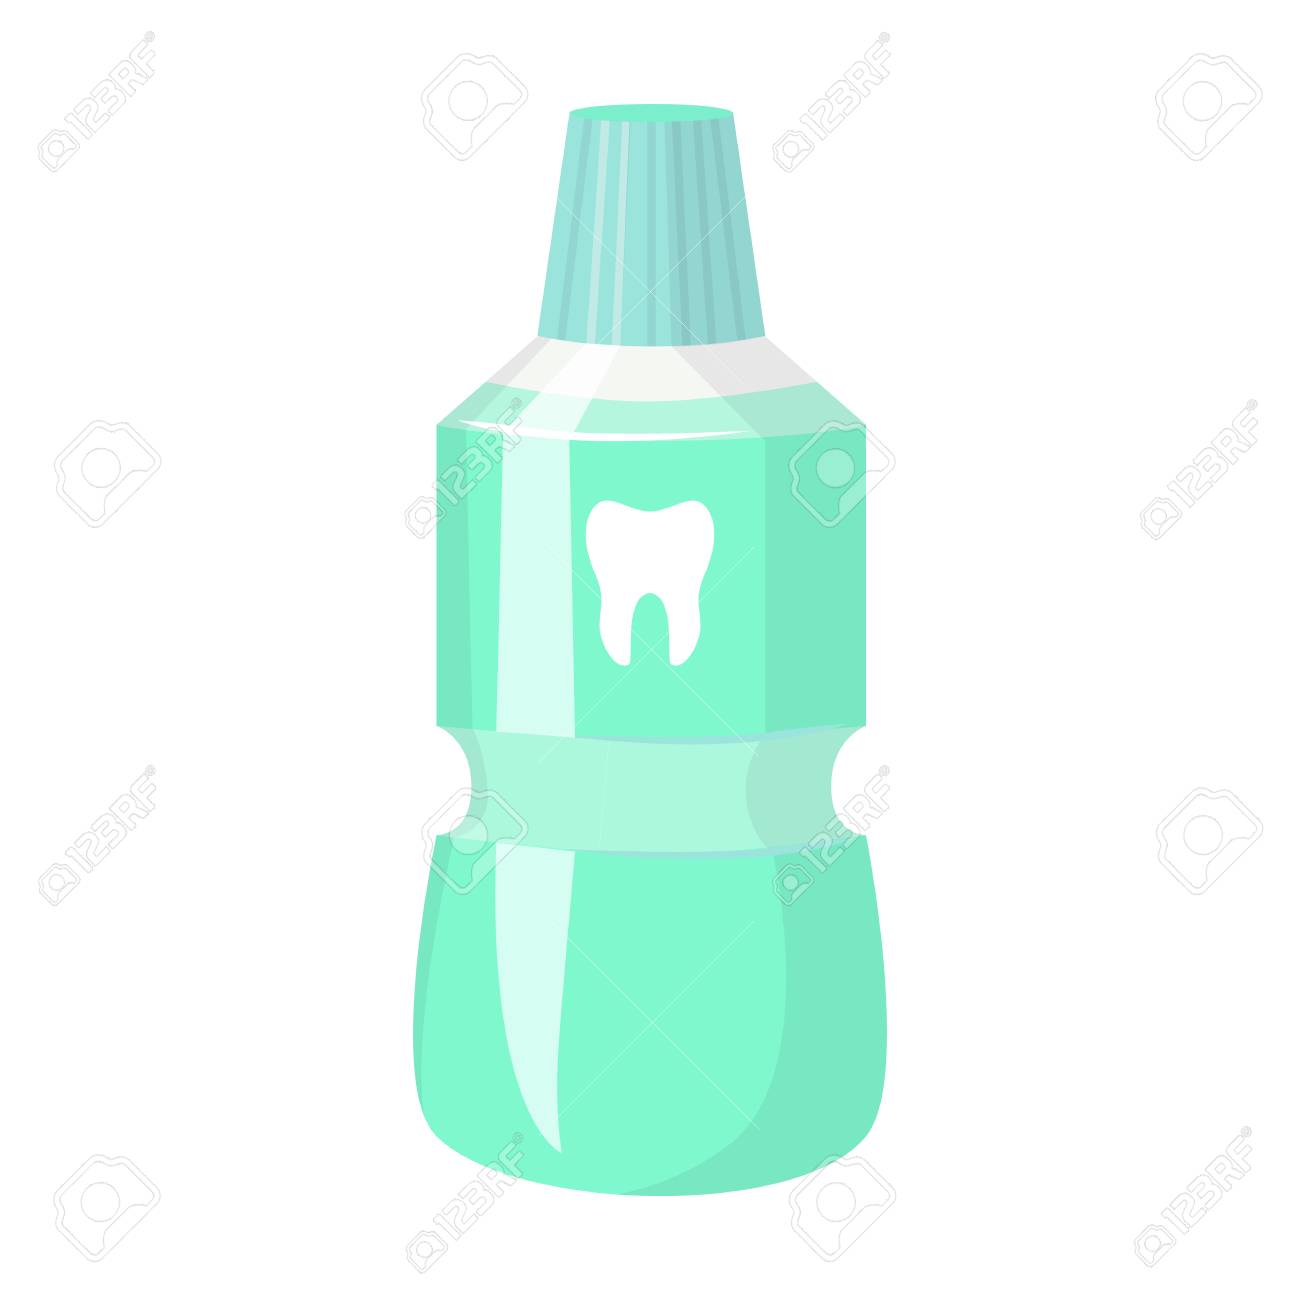 Bottle of mouthwash icon digital red Royalty Free Vector